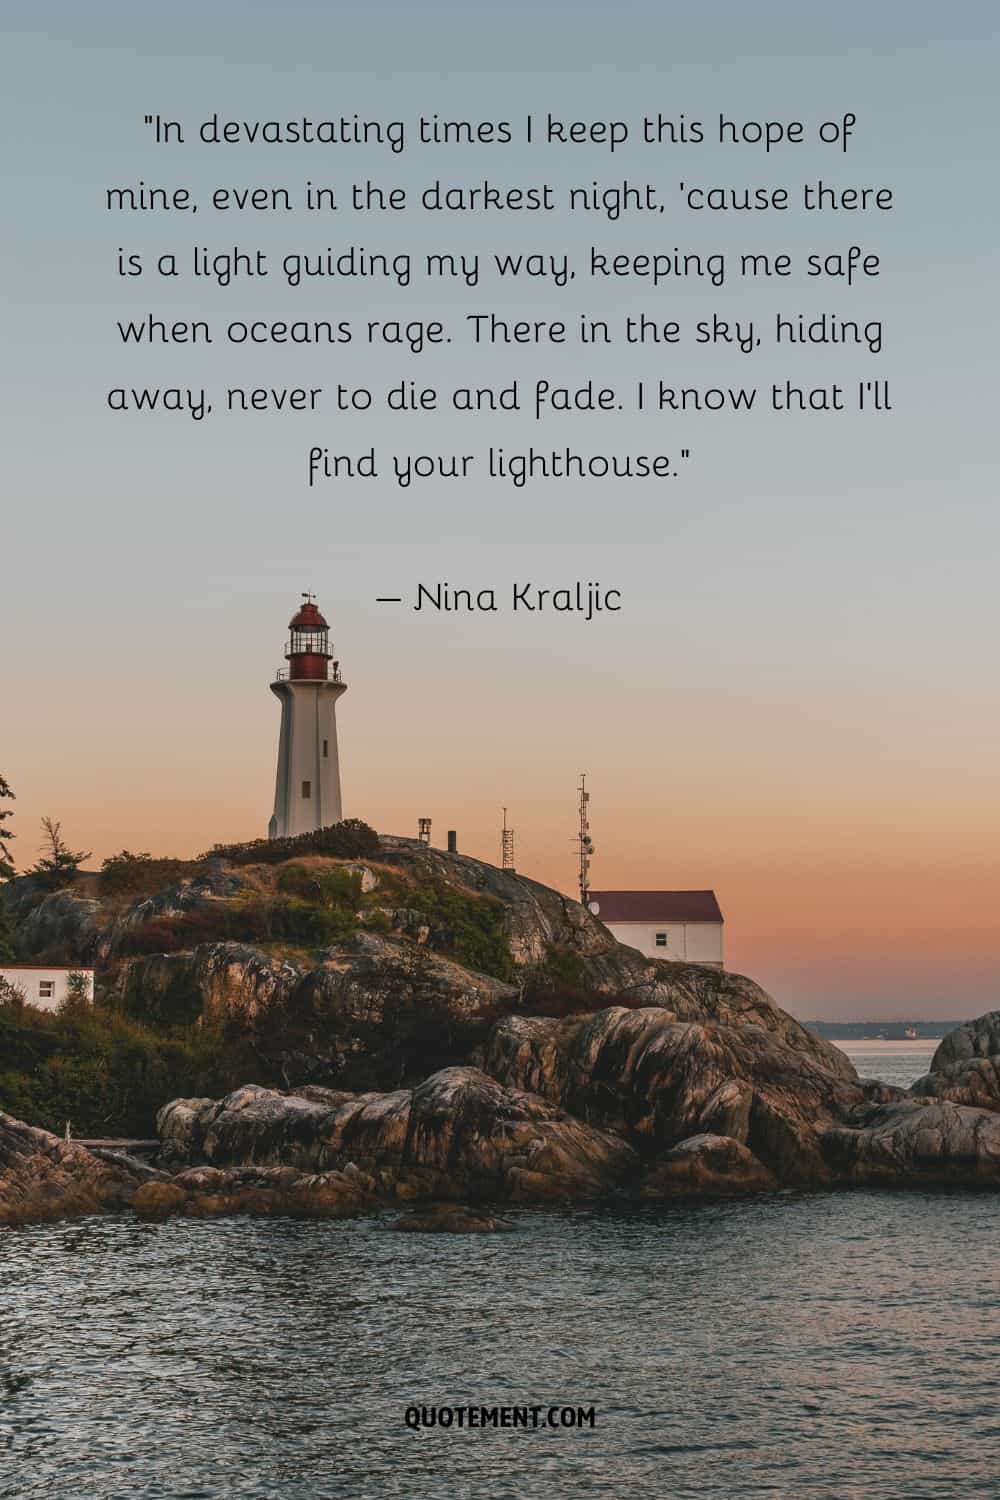 Inspirational quote by Nina Kraljic and a lighthouse in the sunset